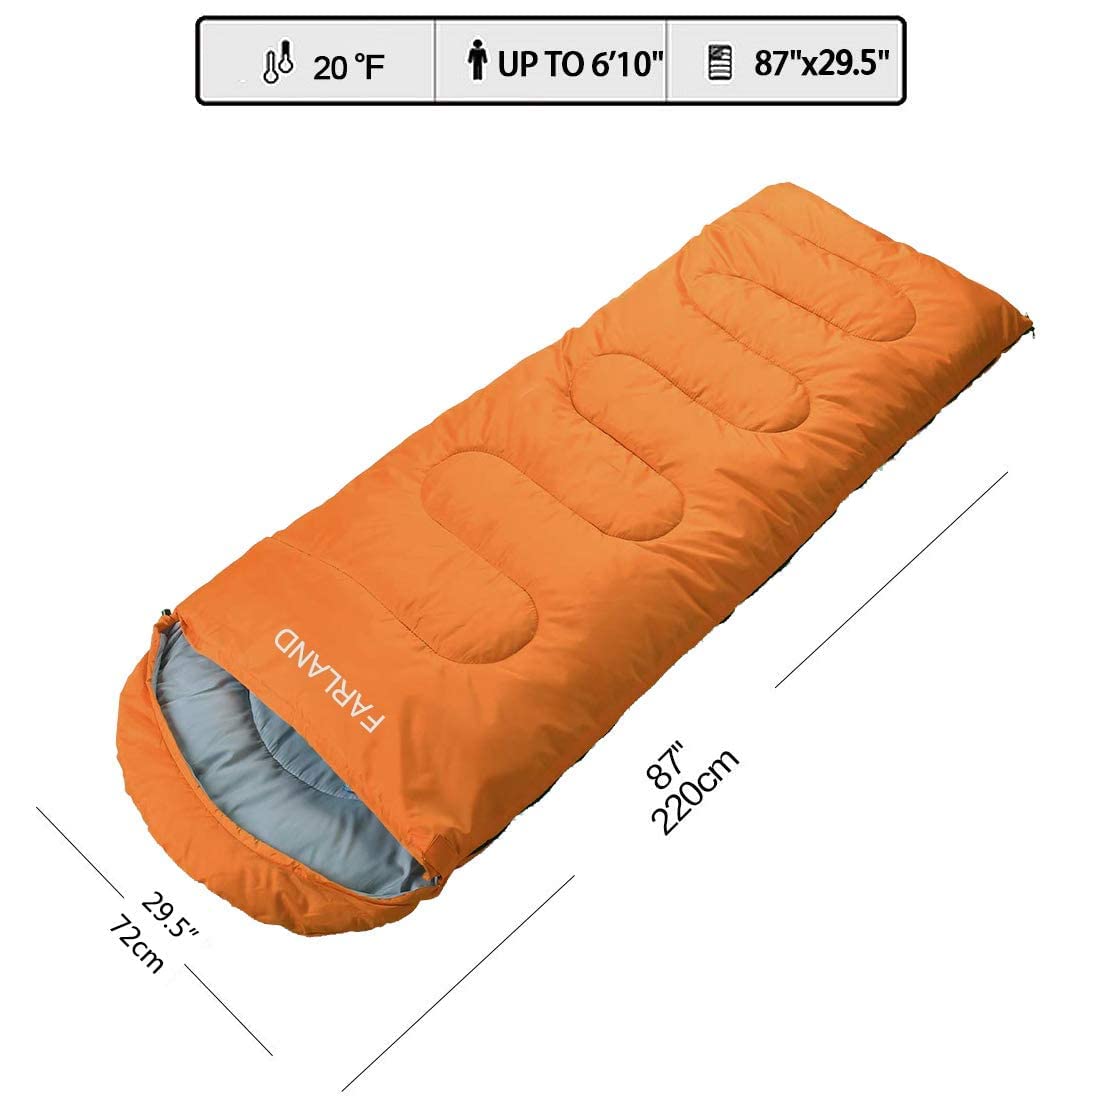 FARLAND Mummy Sleeping Bags 20℉ for Adults Teens Kids with Compression Sack Portable and Lightweight for 3-4 Season Camping, Hik